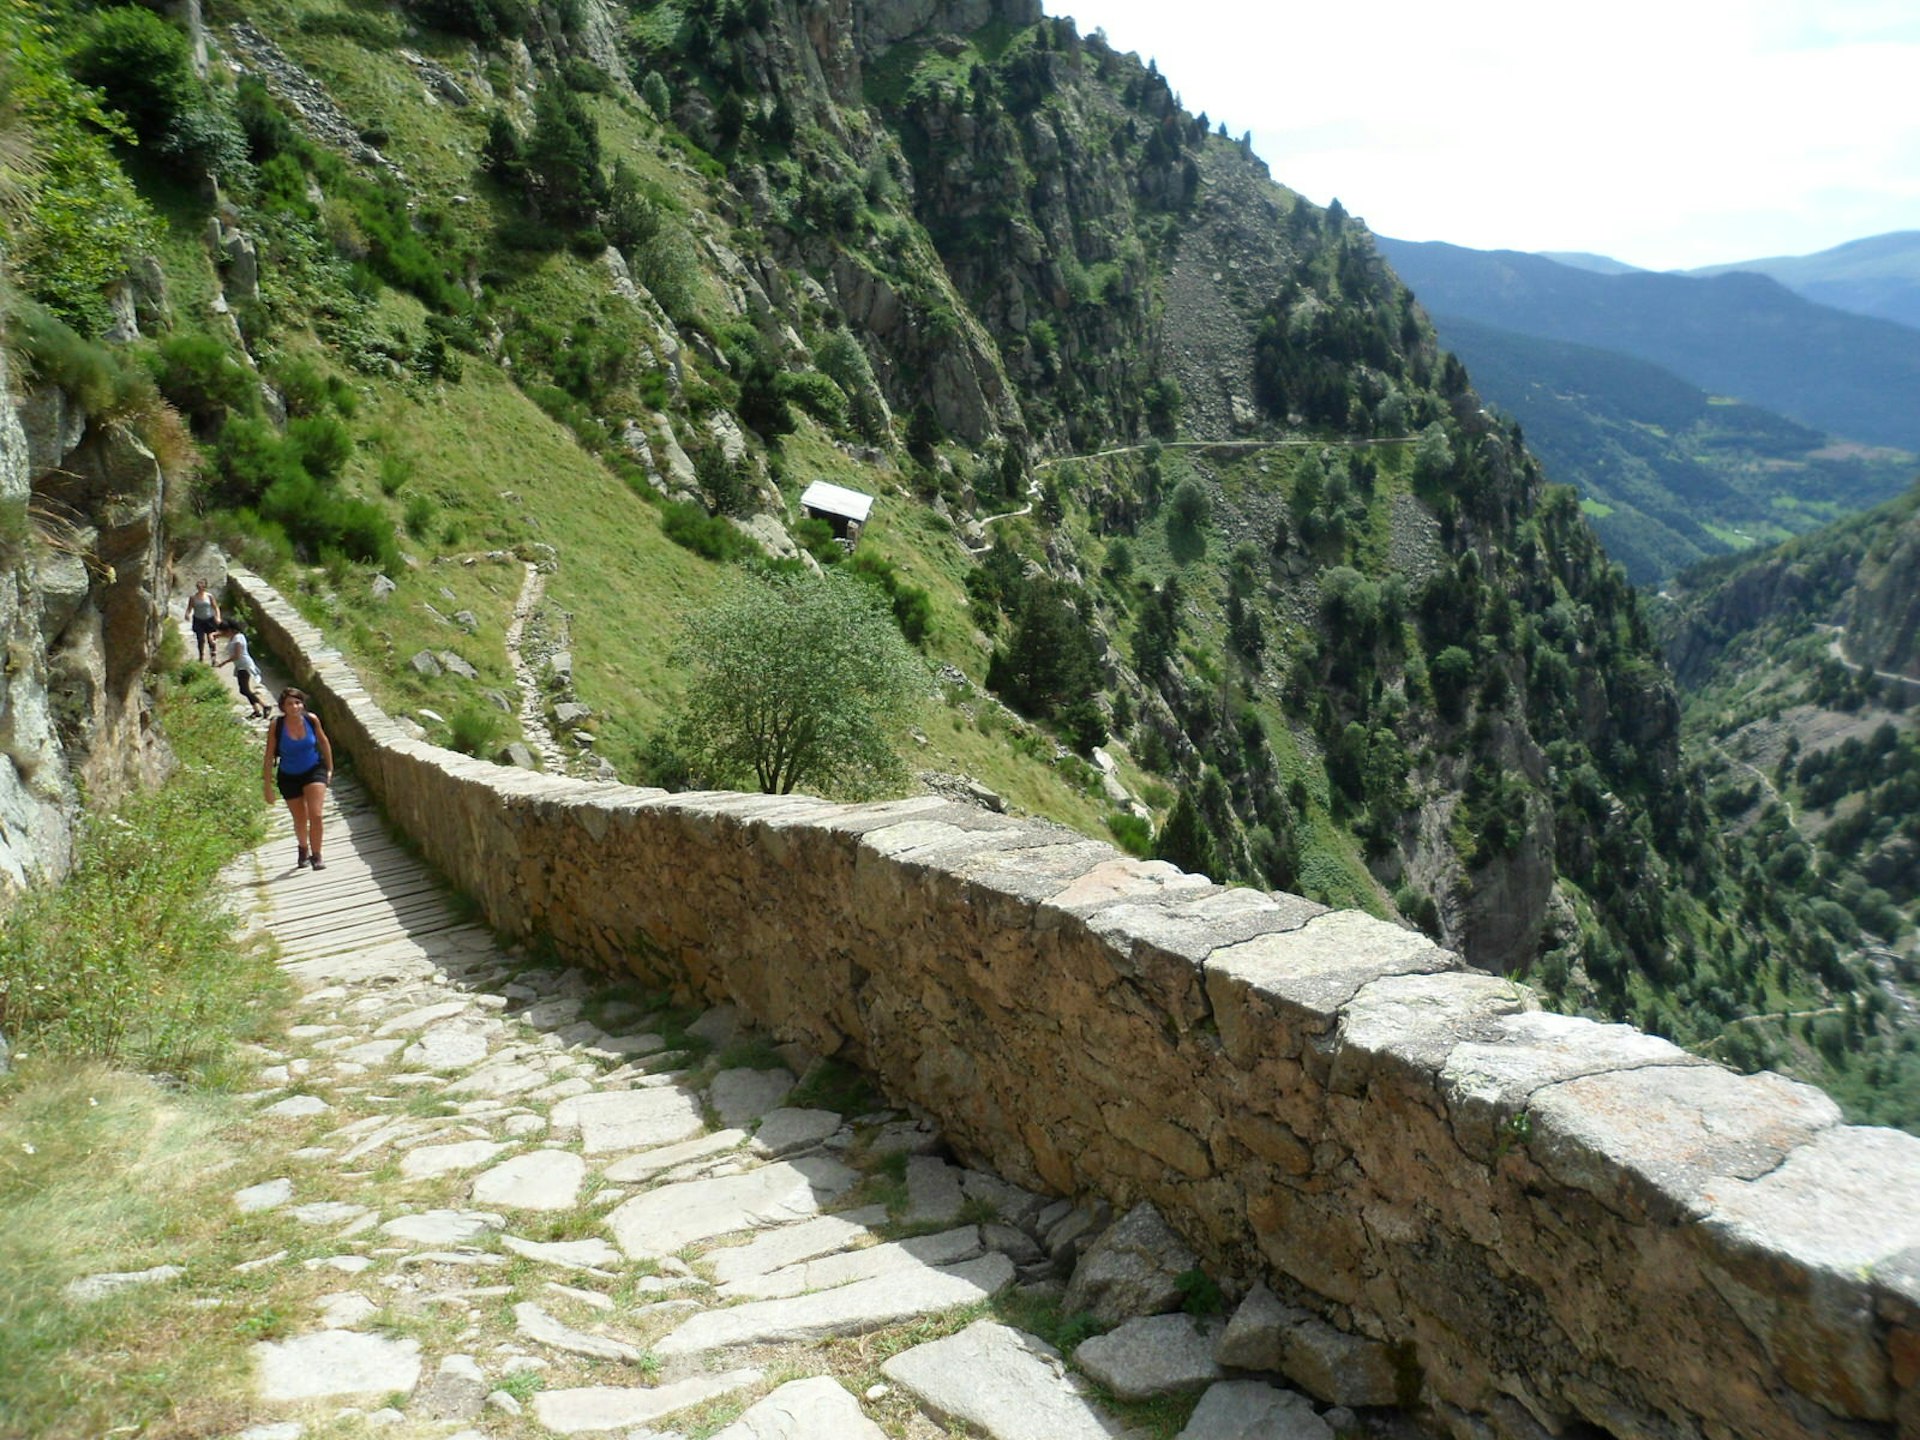 The trek to Vall de Nuria might be hard on the calves, but it's worth it © Maria McKenzie / Lonely Planet